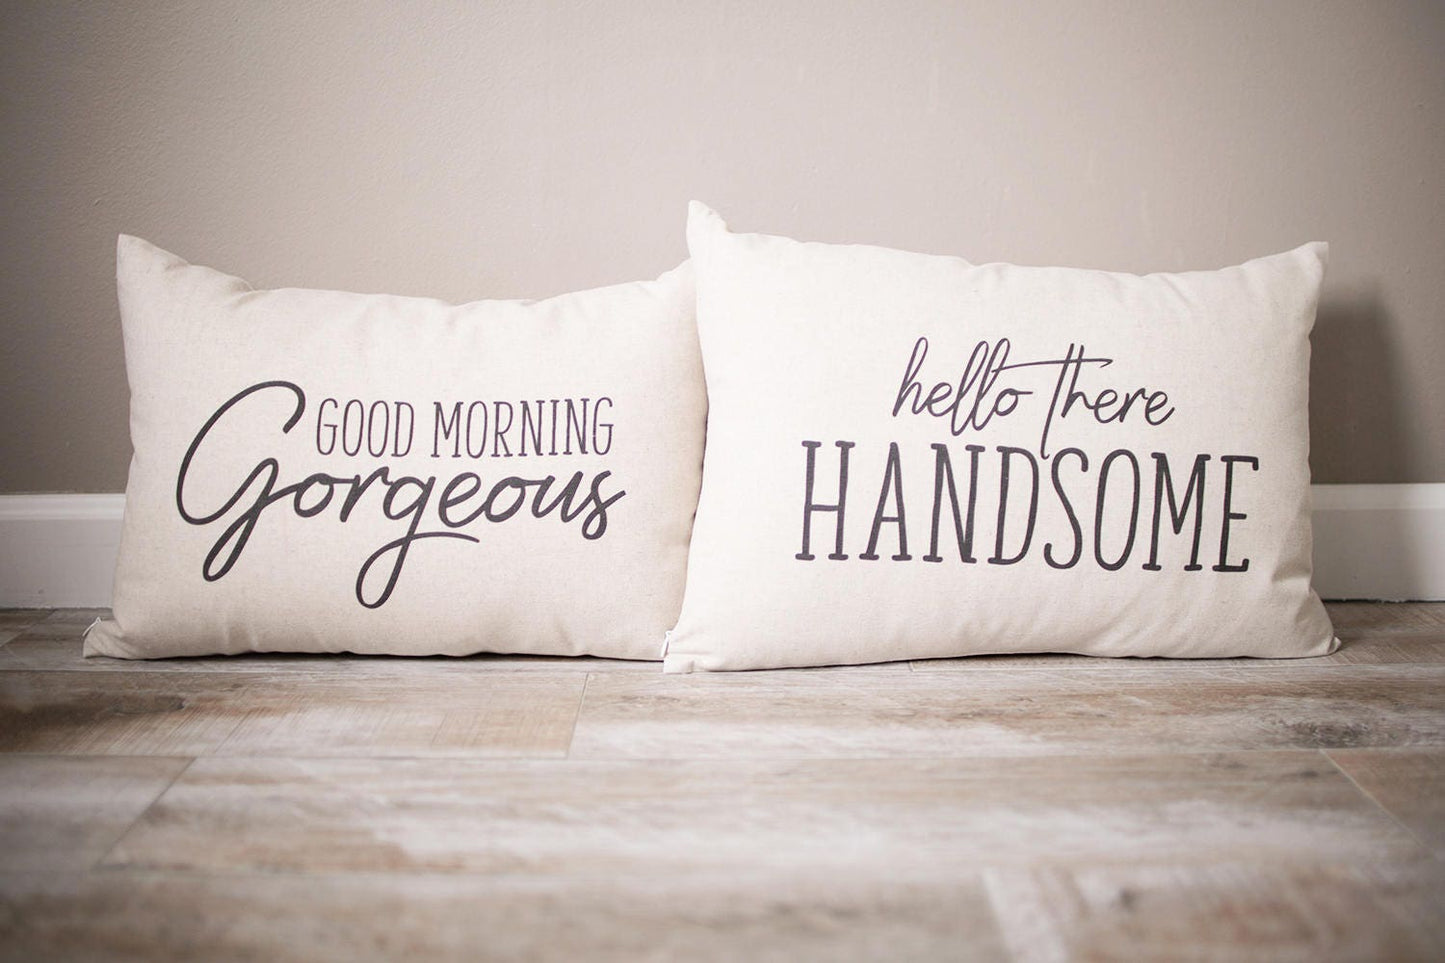 Hello There Handsome Good Morning Gorgeous Pillow Set | Baby Nursery Decor | Personalized Pillow | Monogrammed Gift | Rustic Home Decor